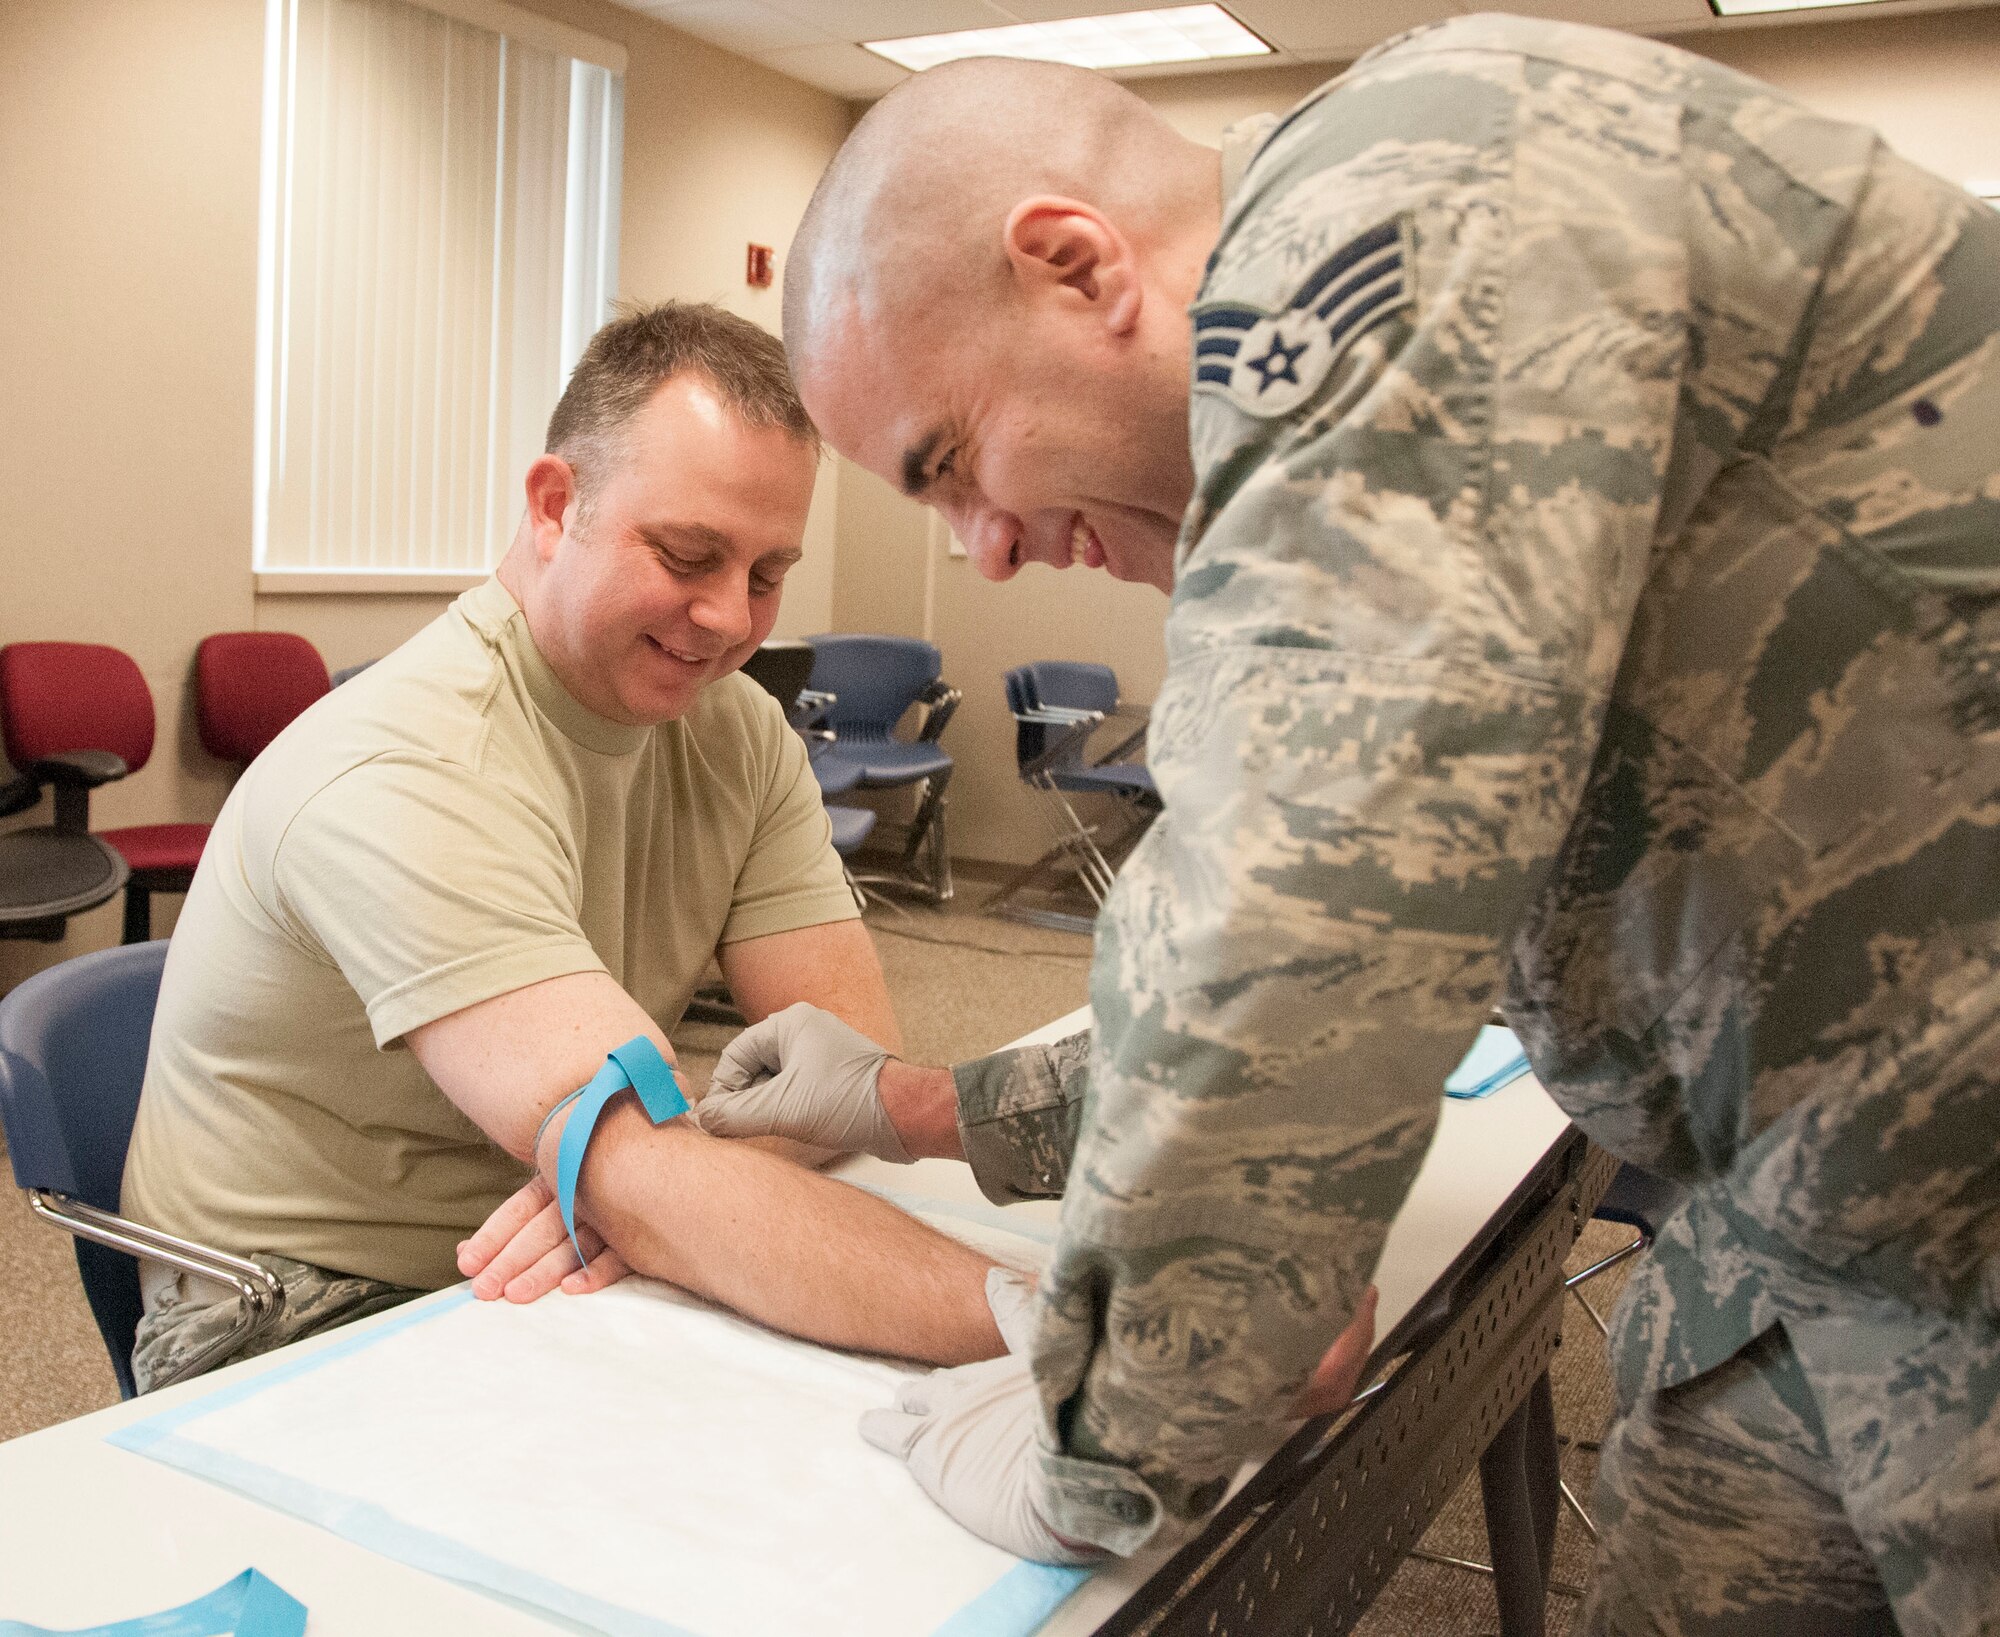 Tech. Sgt. Brett Haas of the 127th Maintenance Operation Flight receives a routine blood draw from Senior Airman Rick Burnett an aerospace medical technician with the 127th Medical Group on February 3,2018. Military members are required to fulfill mandated medical requirements annually to ensure readiness to deploy worldwide.